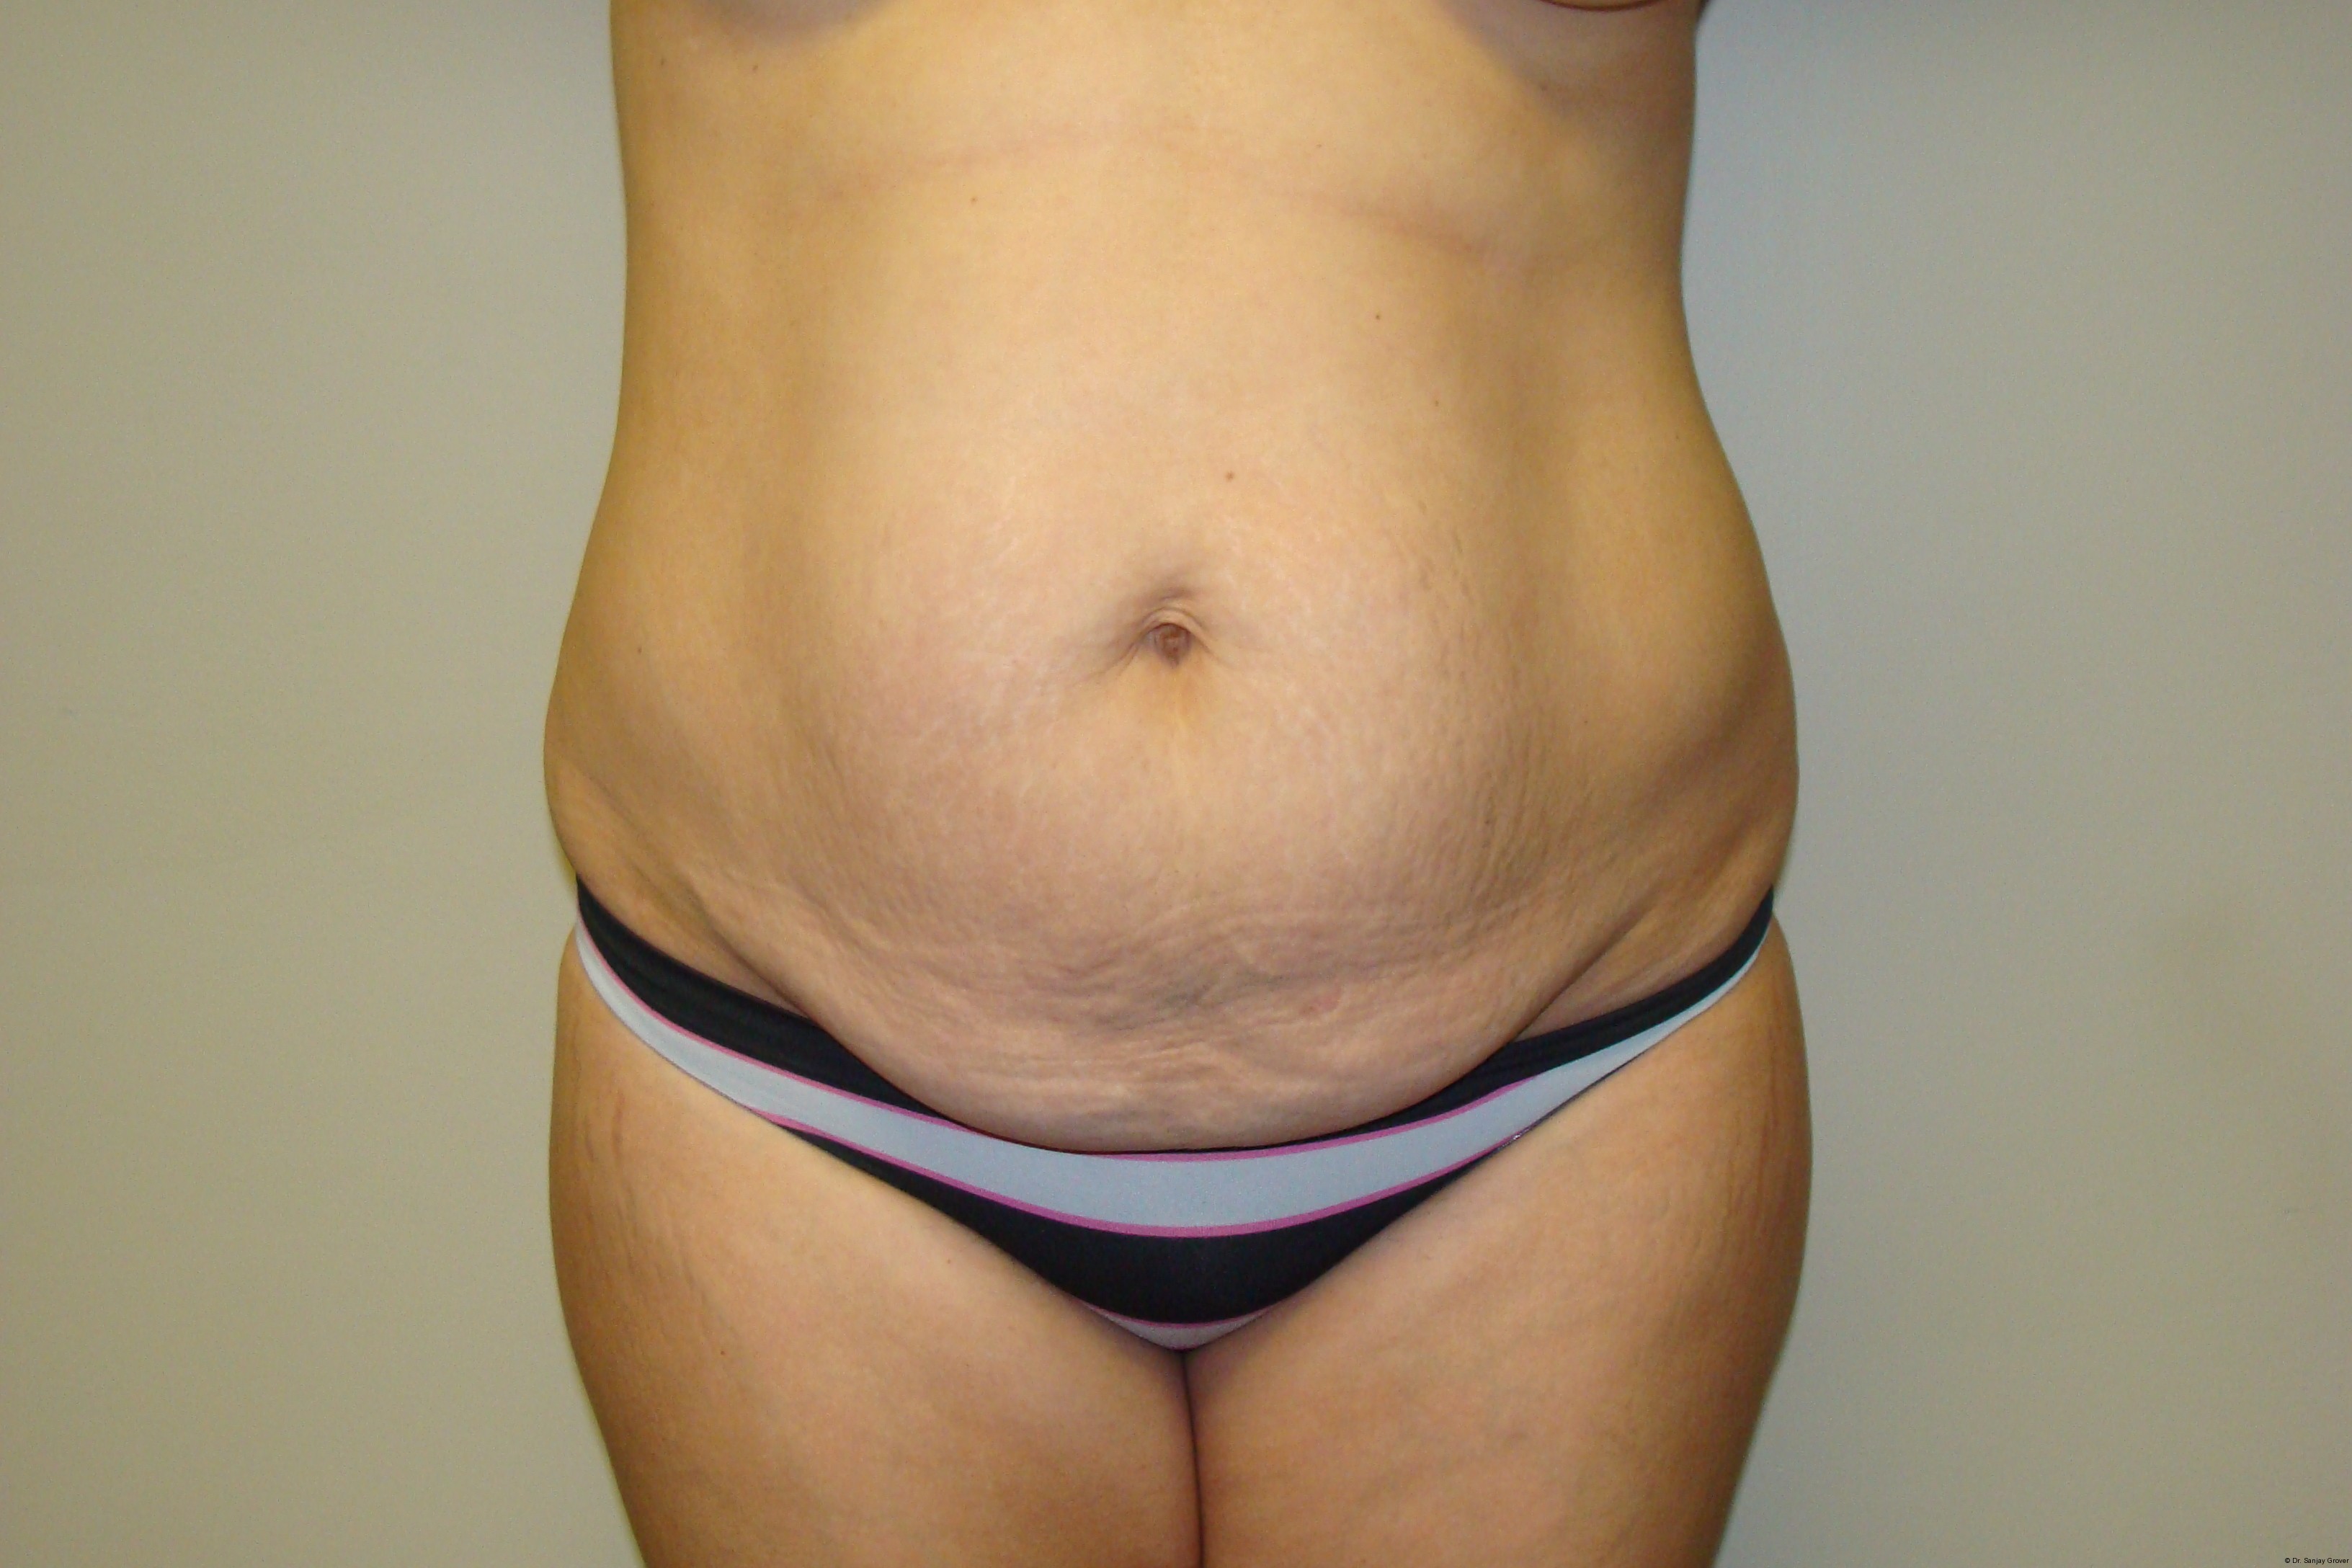 Tummy Tuck Before and After 38 | Sanjay Grover MD FACS